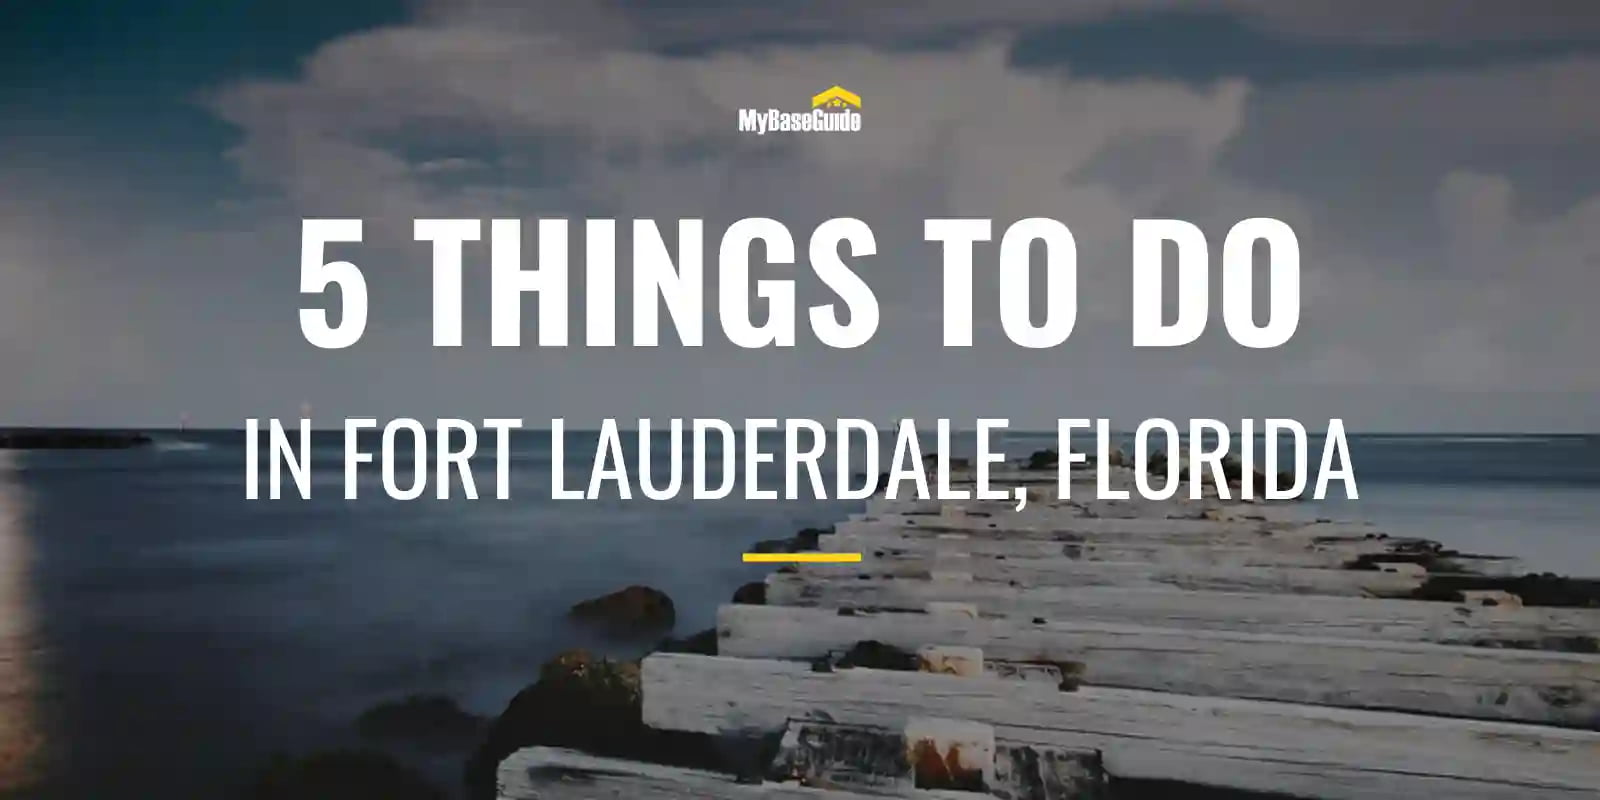 5 Things to Do in Fort Lauderdale, Florida